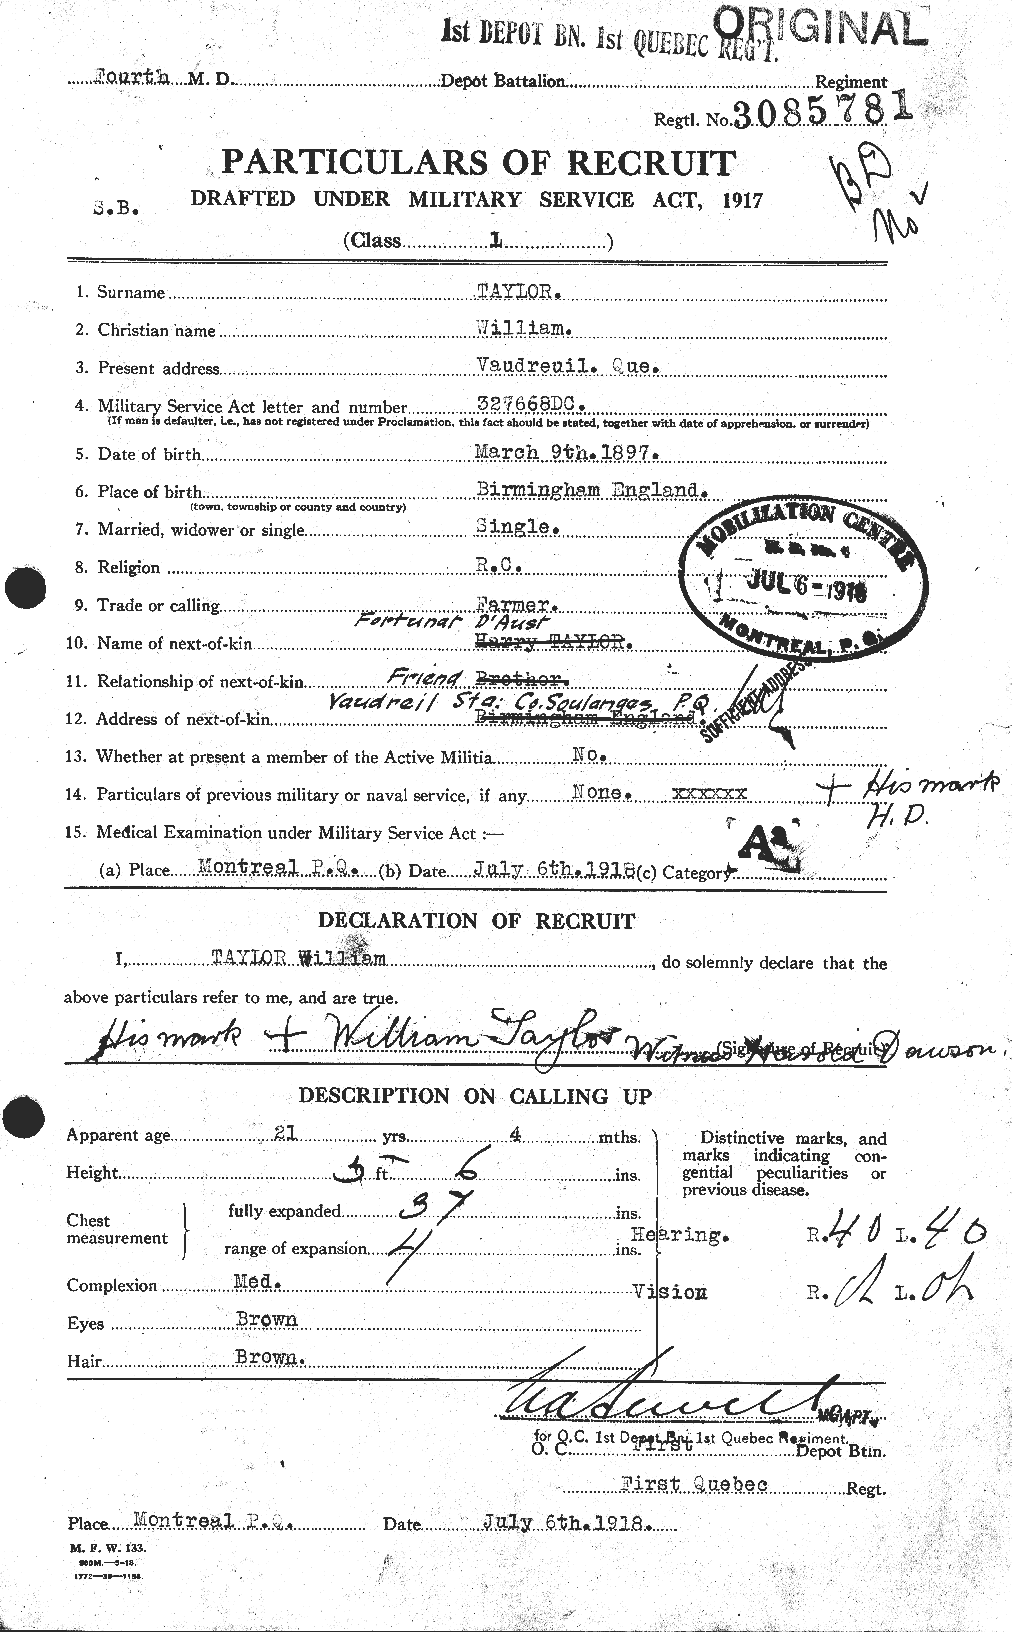 Personnel Records of the First World War - CEF 628183a